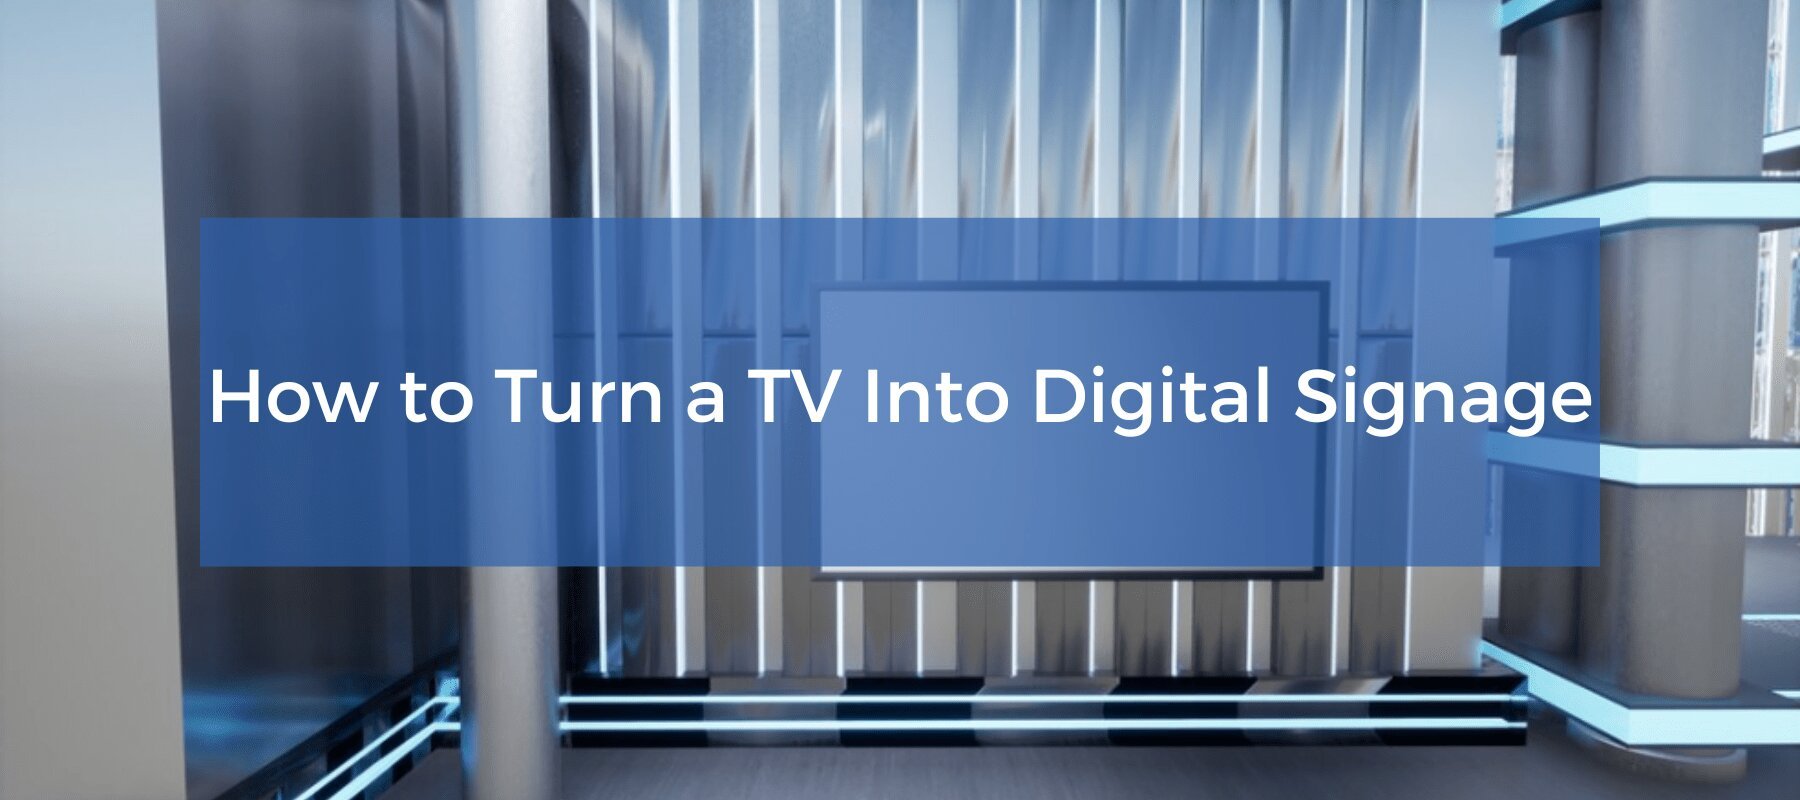 How to turn a TV into digital signage.